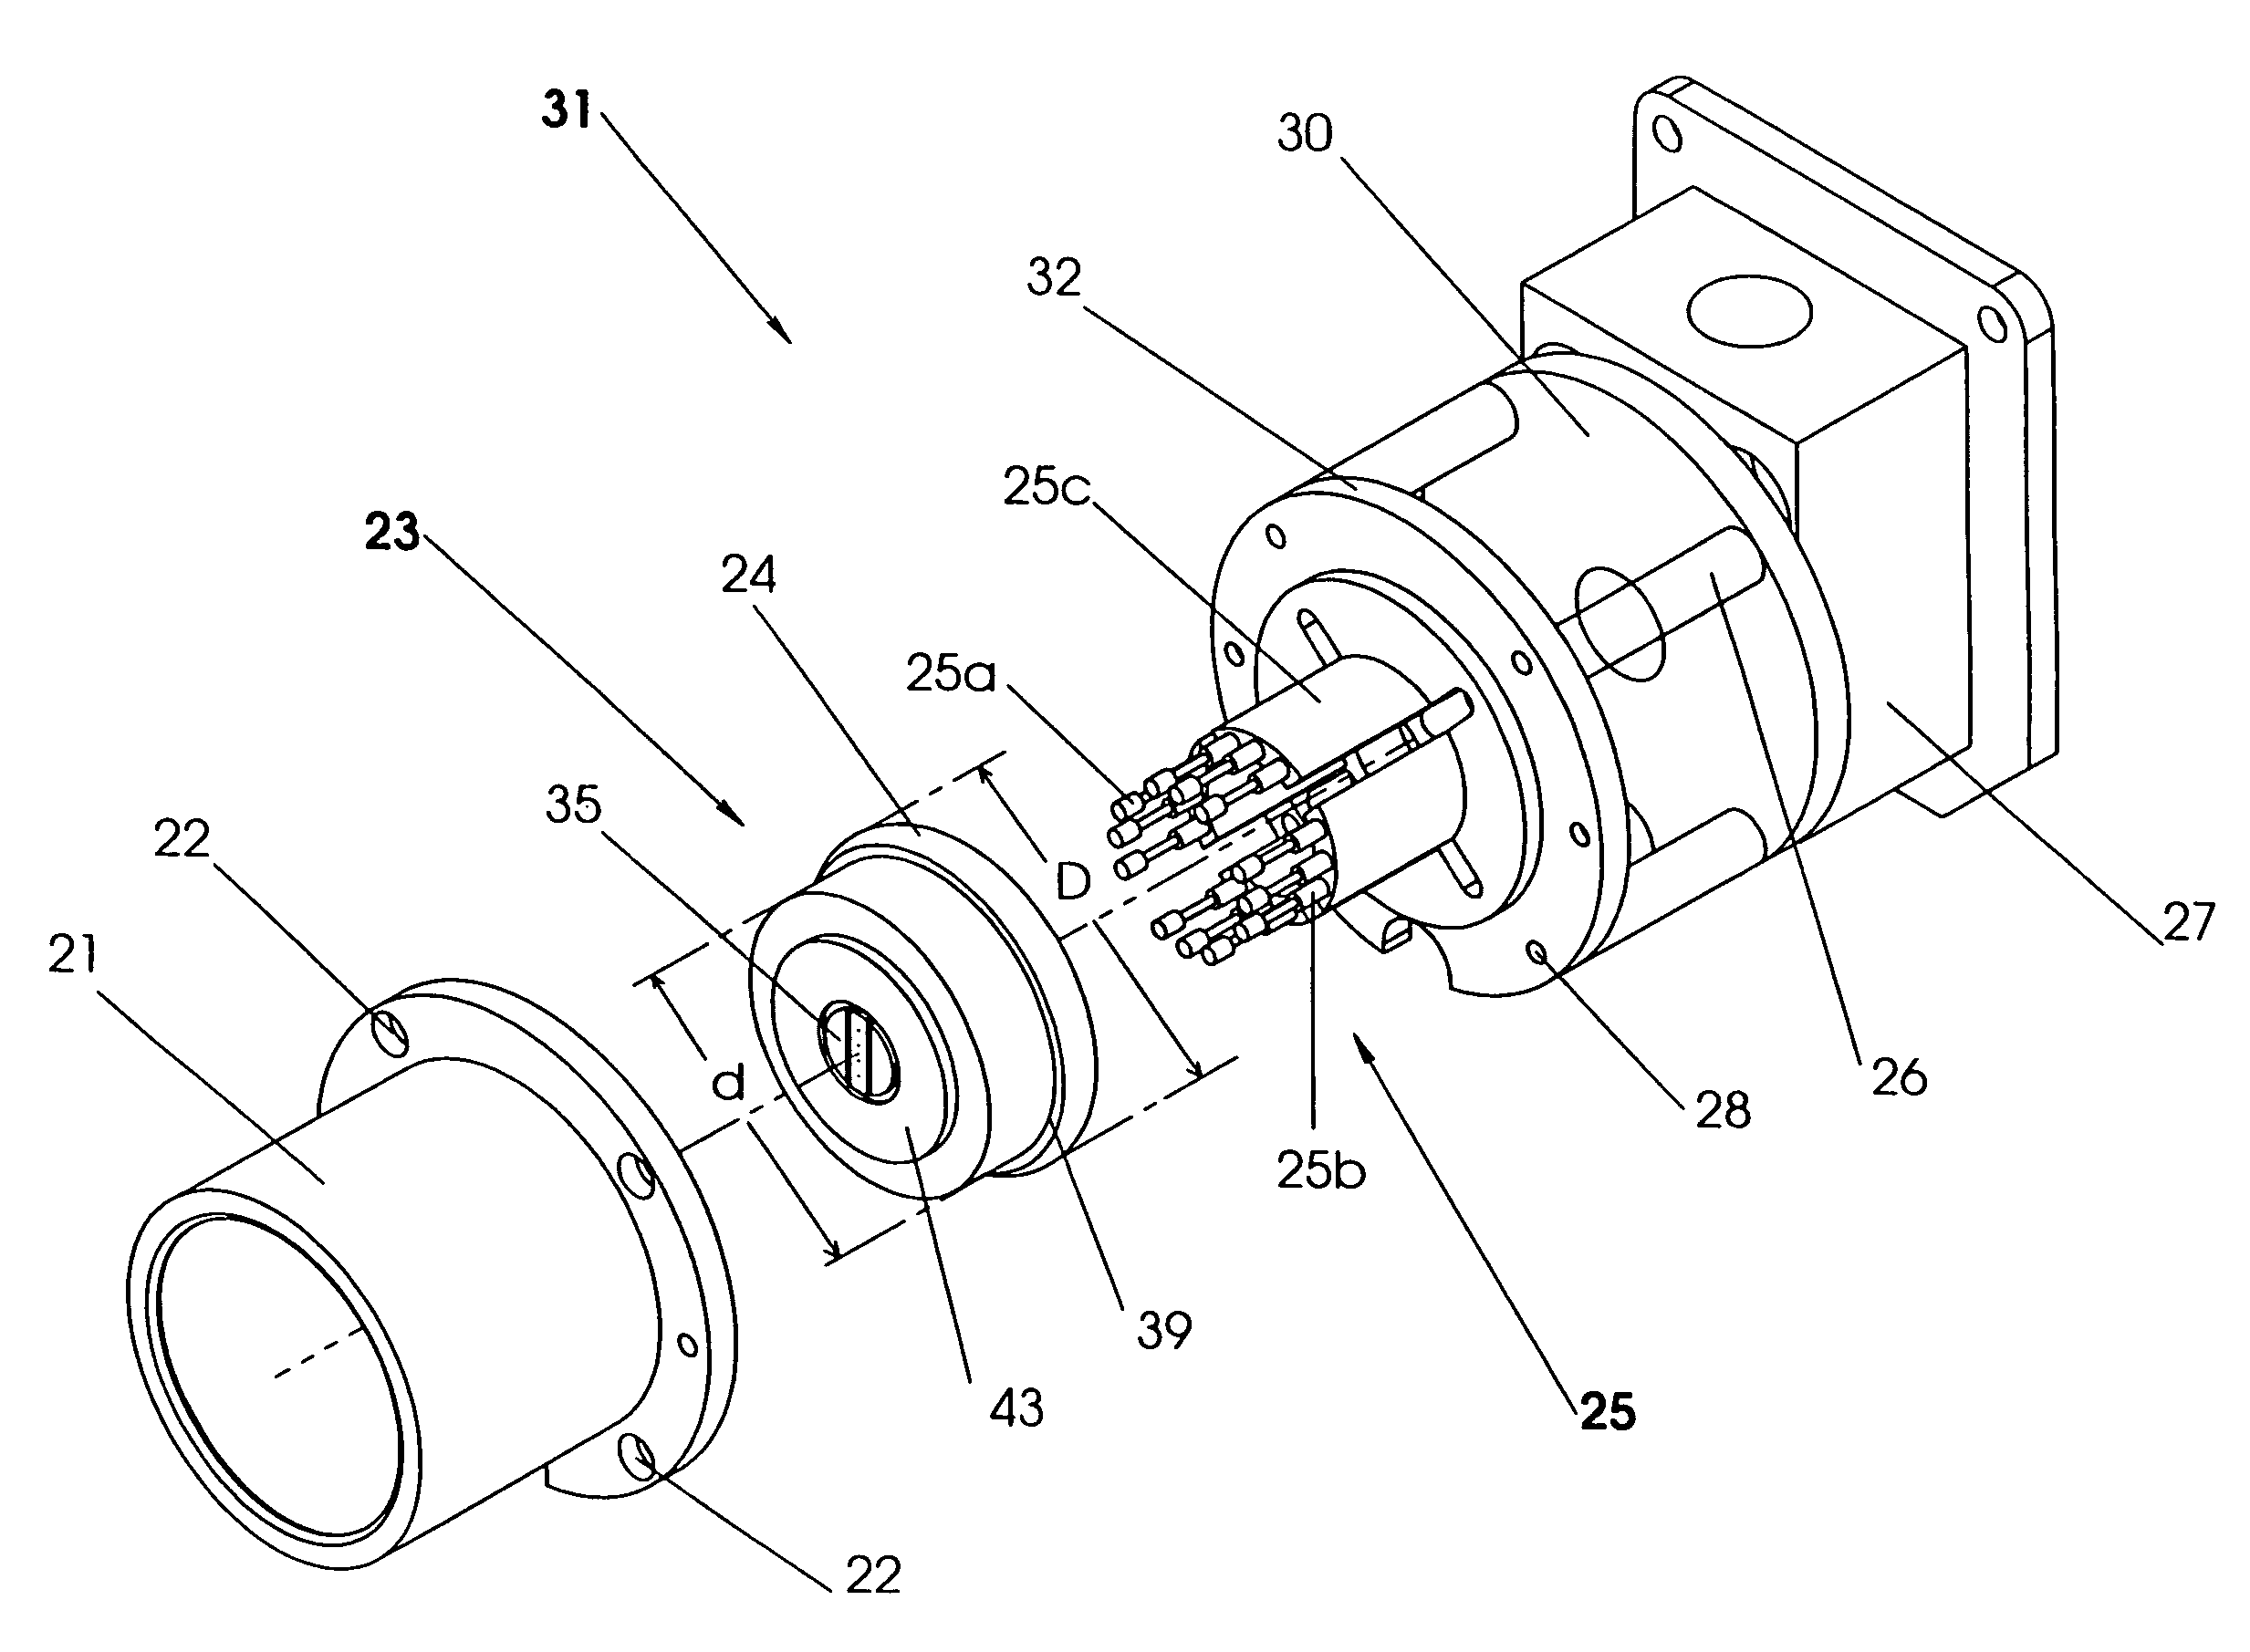 Automatic mercury probe for use with a semiconductor wafer